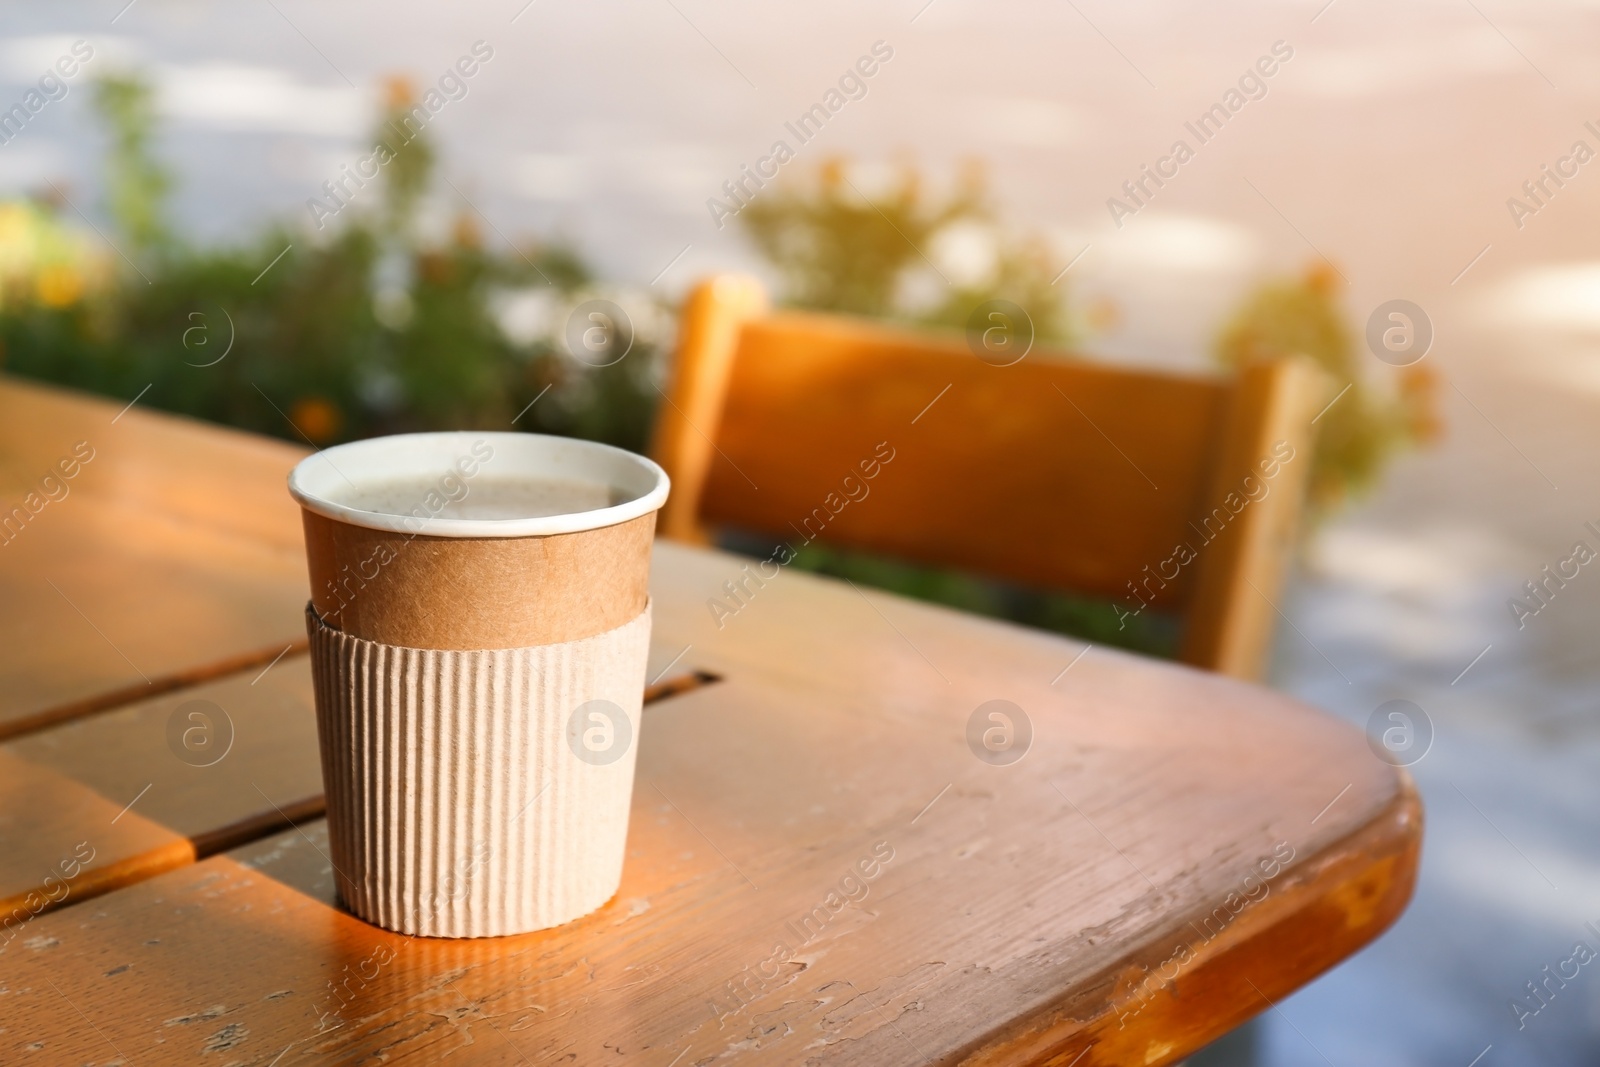 Photo of Cardboard coffee cup on wooden table outdoors. Space for text